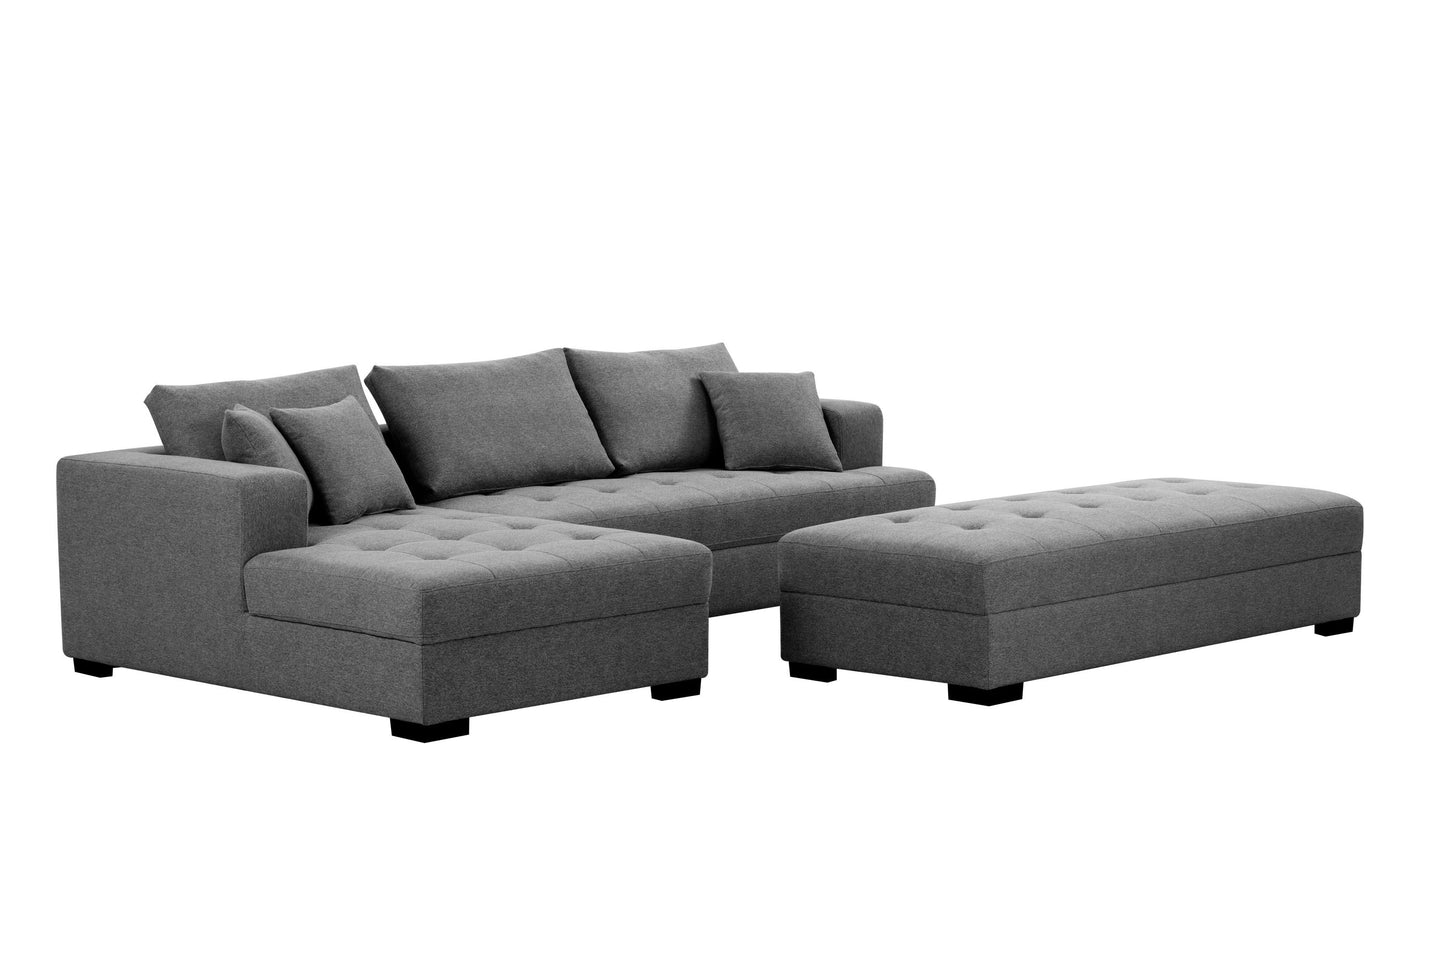 111'' Tufted Fabric 3-Seat L-Shape Sectional Sofa Couch Set w/Chaise Lounge, Ottoman Coffee Table Bench, Dark Grey